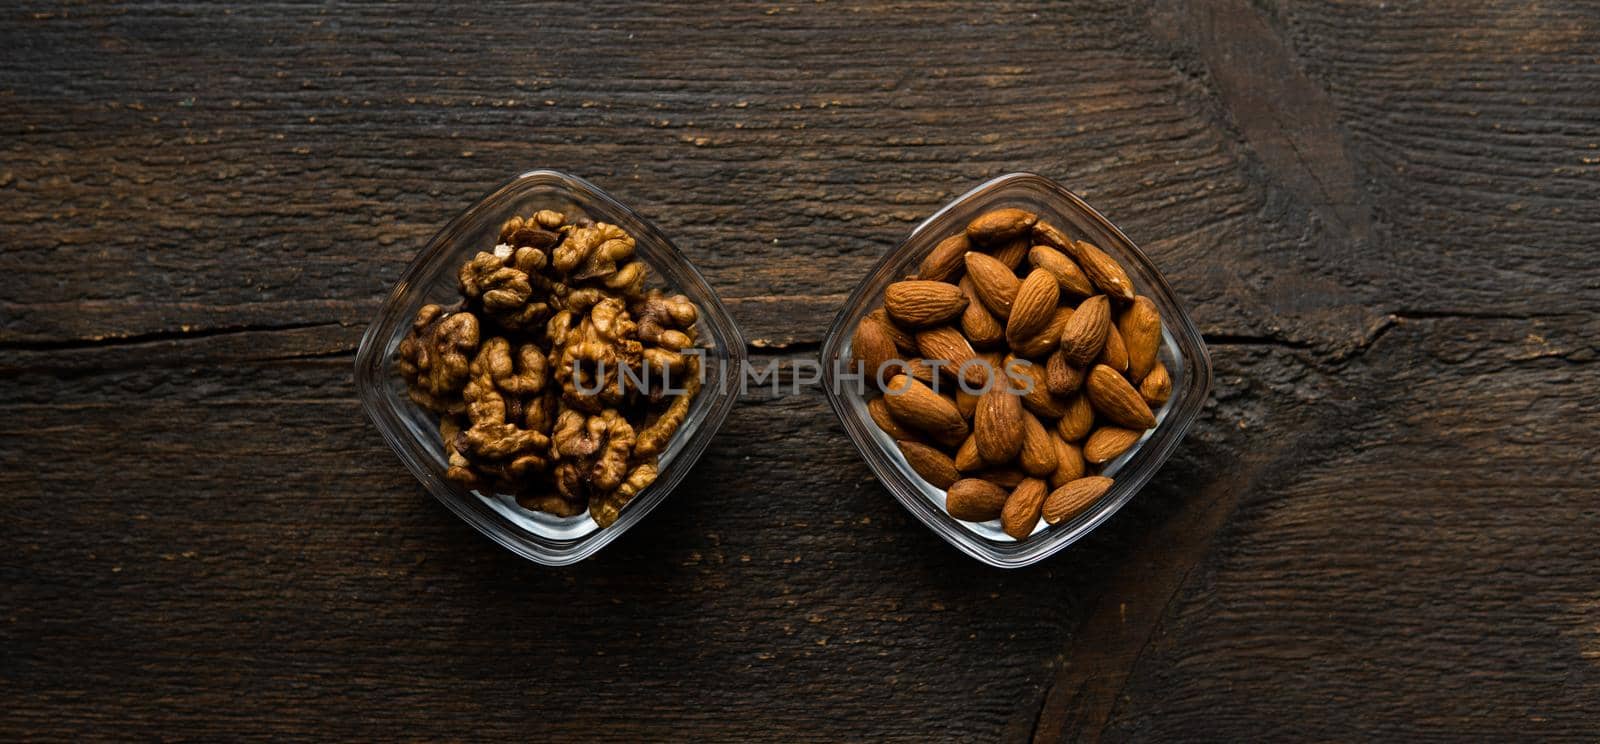 Almond and walnut in a small plates which standing on a vintage wooden table. Nuts is a healthy vegetarian protein and nutritious food